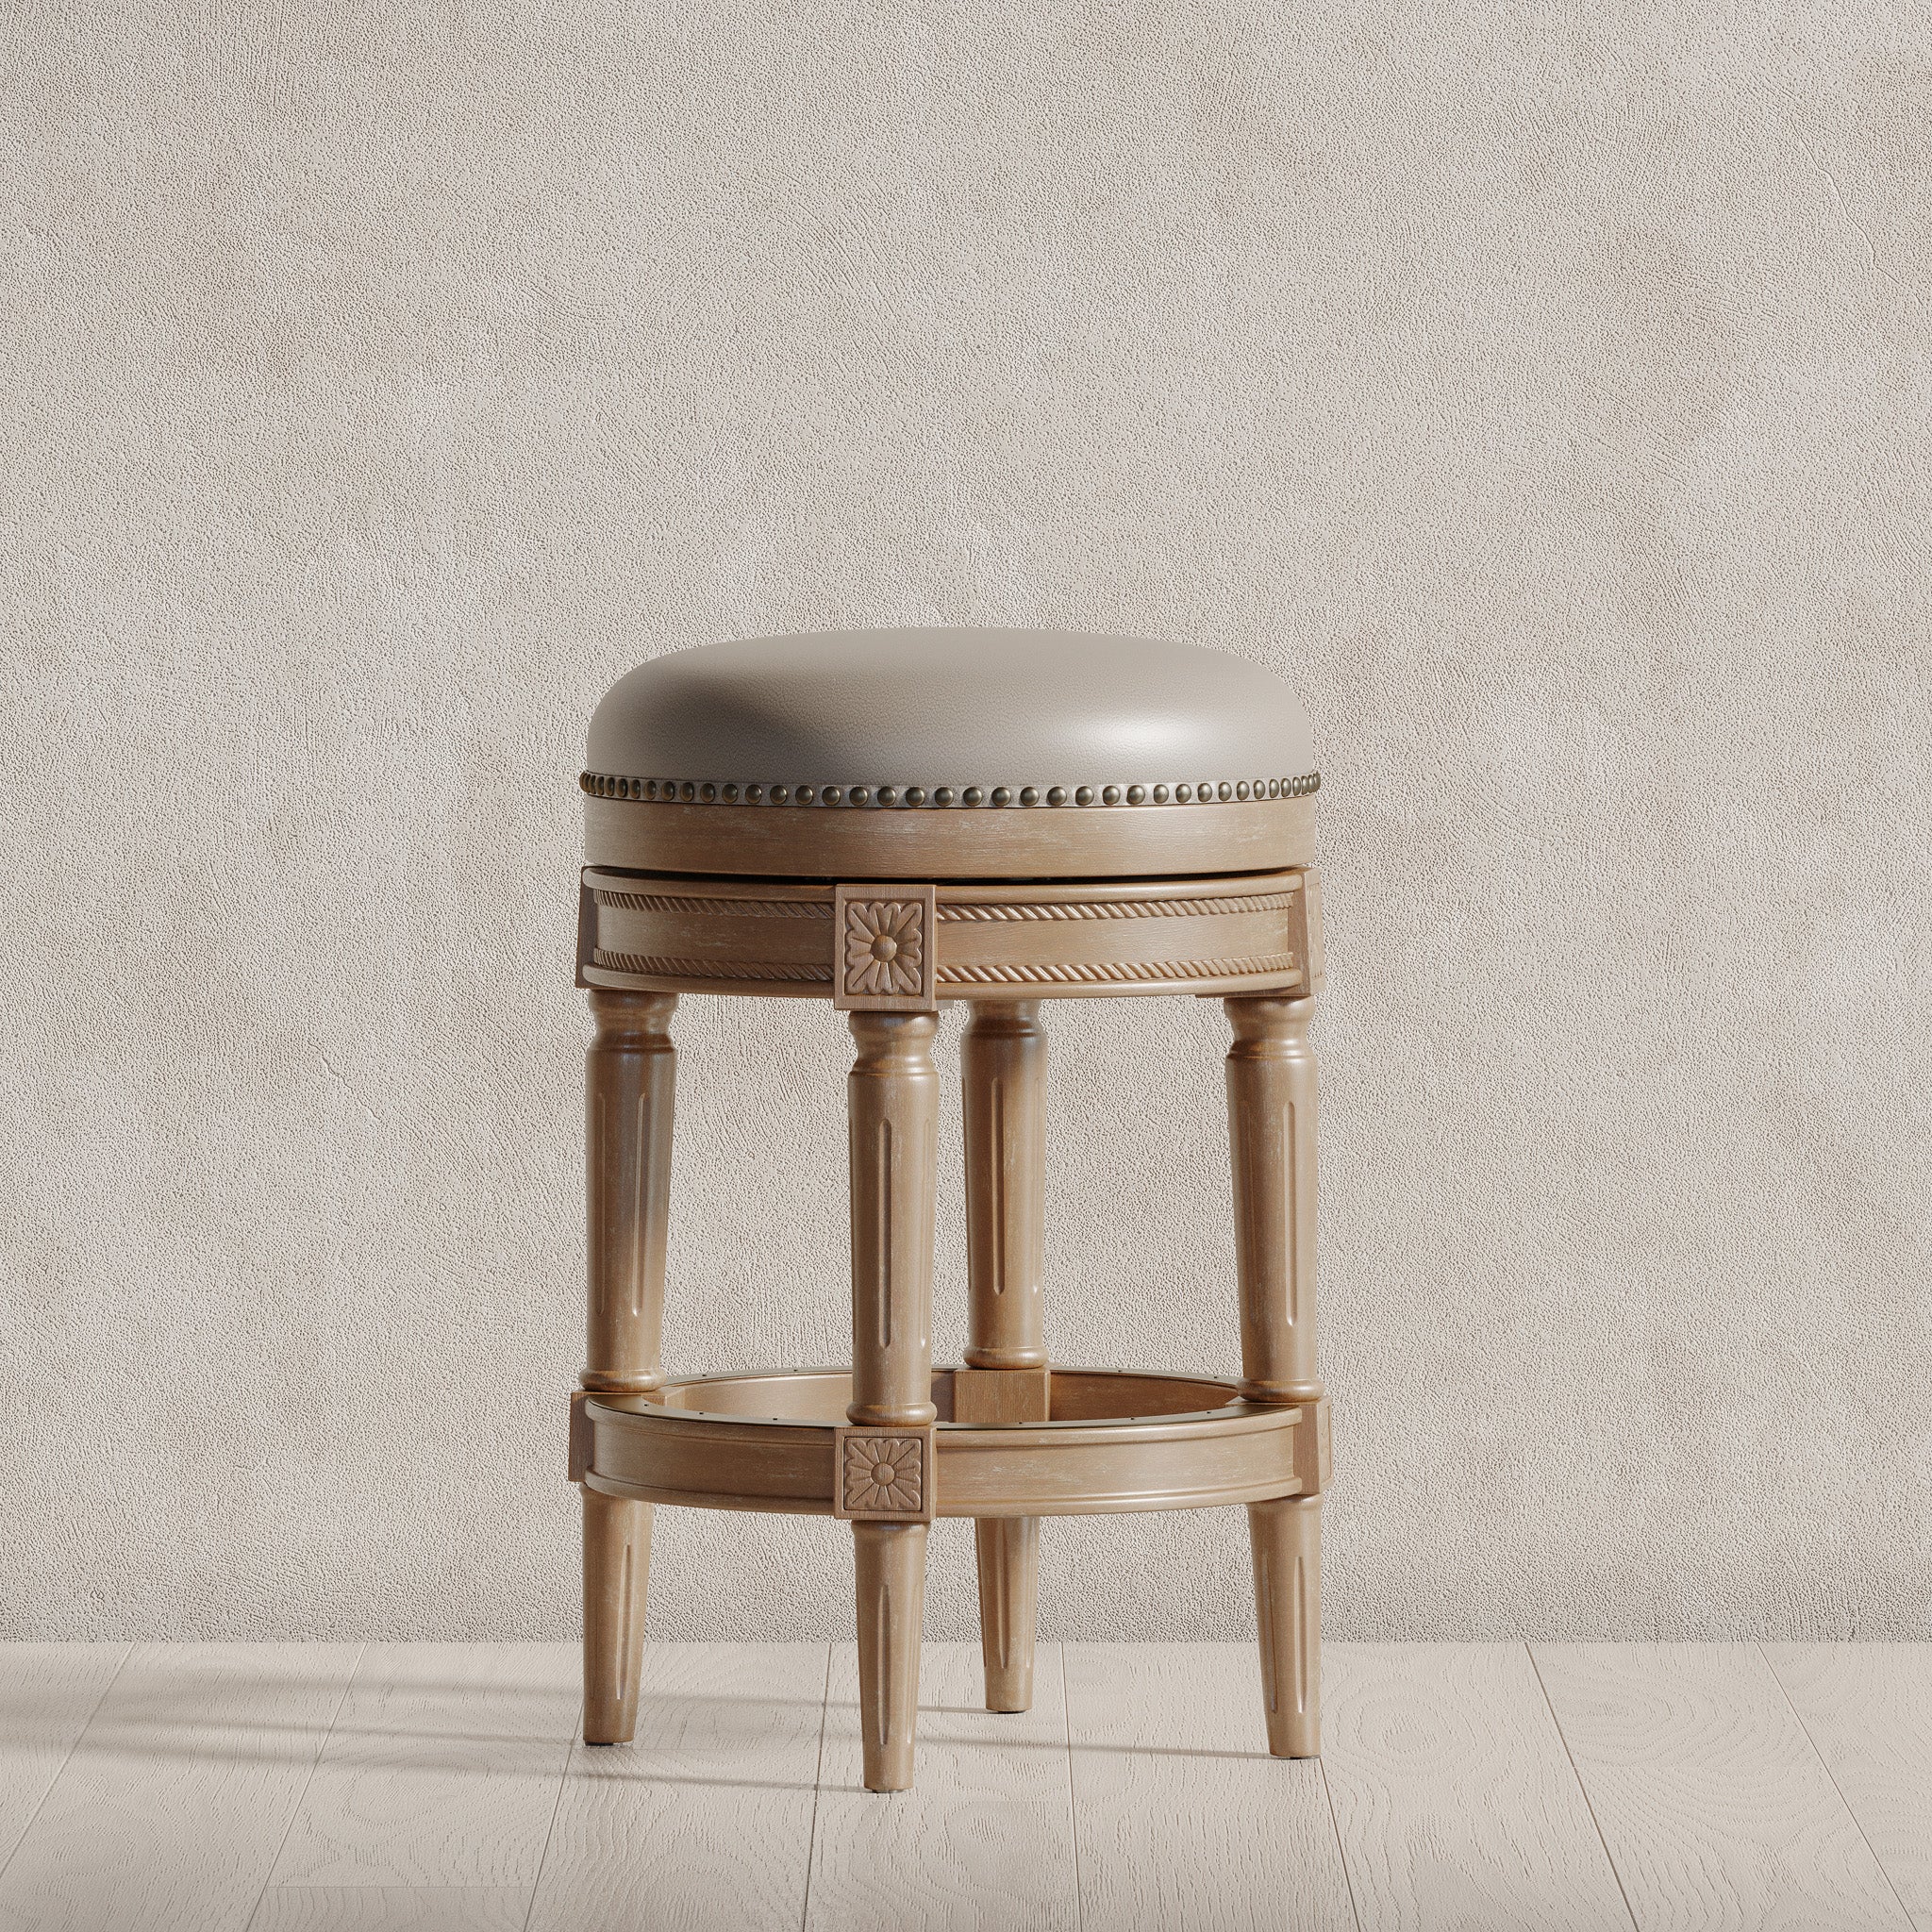 Pullman Backless Counter Stool in Weathered Oak Finish with Avanti Bone Vegan Leather in Stools by Maven Lane